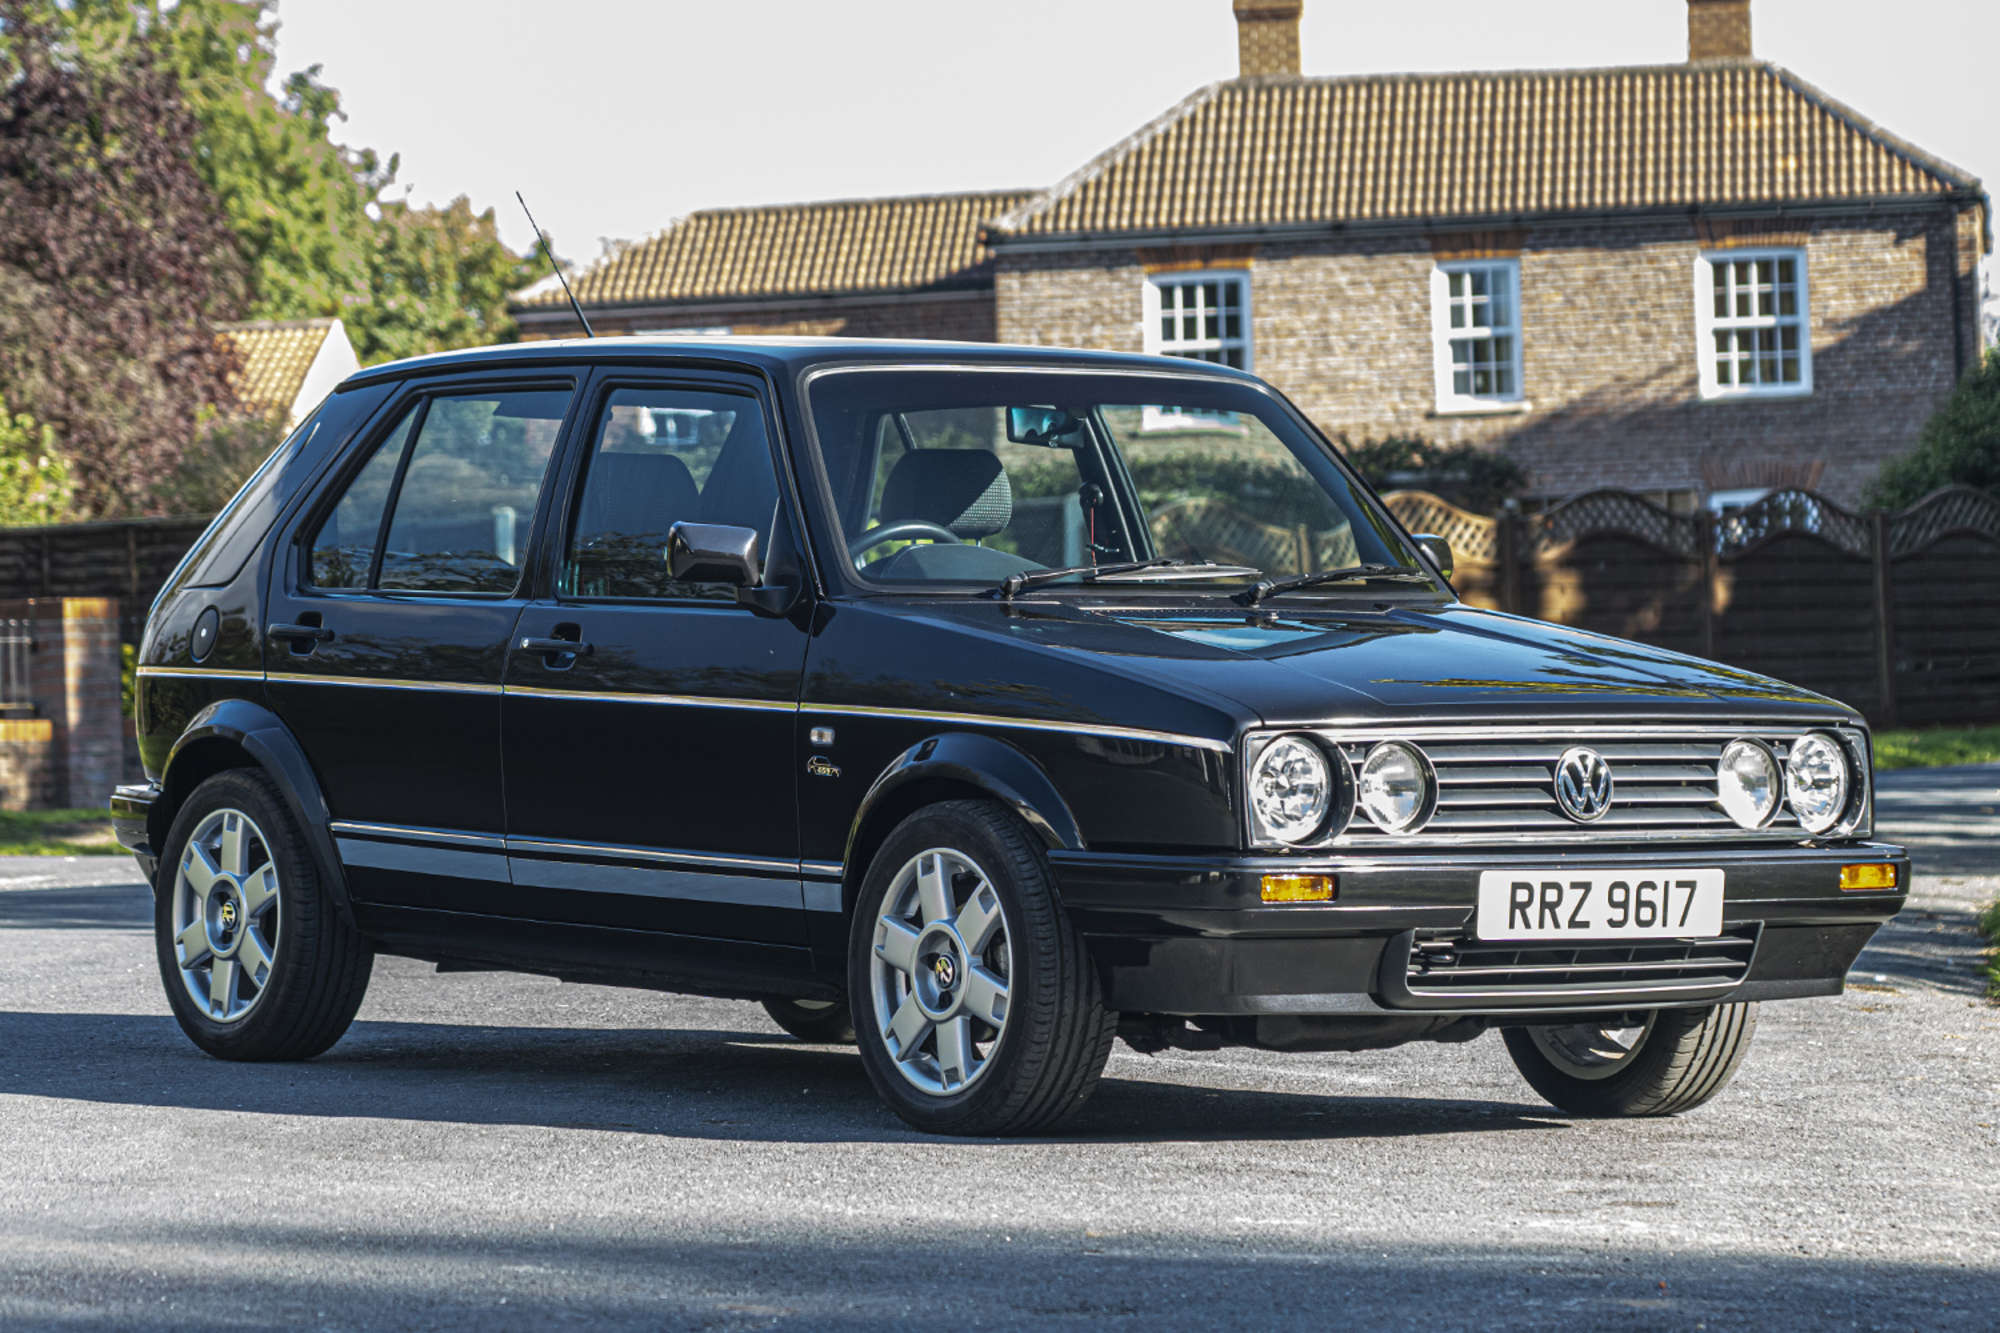 Foreplay: This VW Citi Golf Mk1 would suit us to a tee